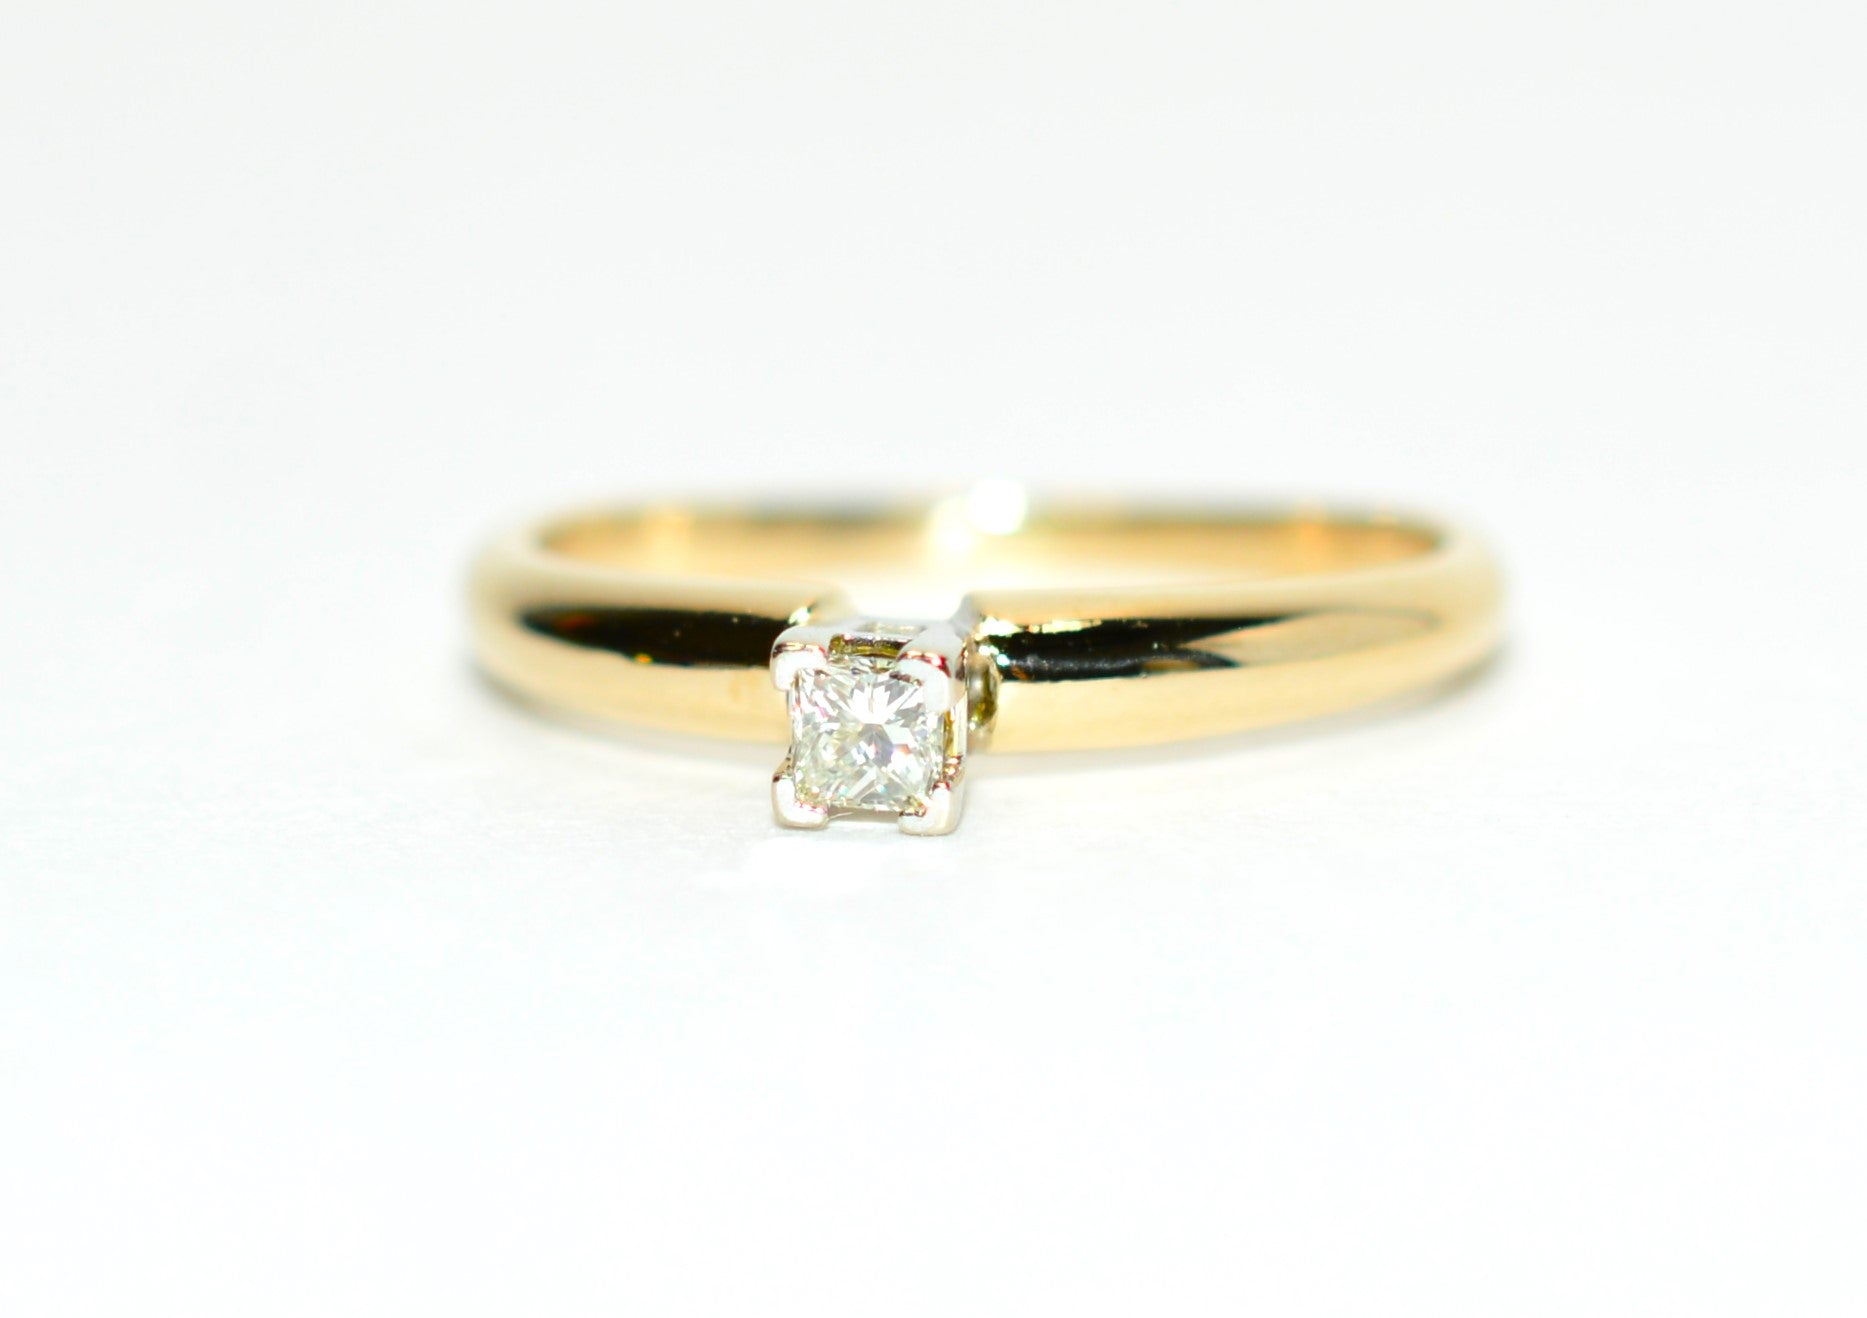 Natural Diamond Ring 14K Gold .15ct Engagement Ring Wedding Bridal Jewelry Bridal Jewellery Solitaire Ring Classic Vintage Estate Ring